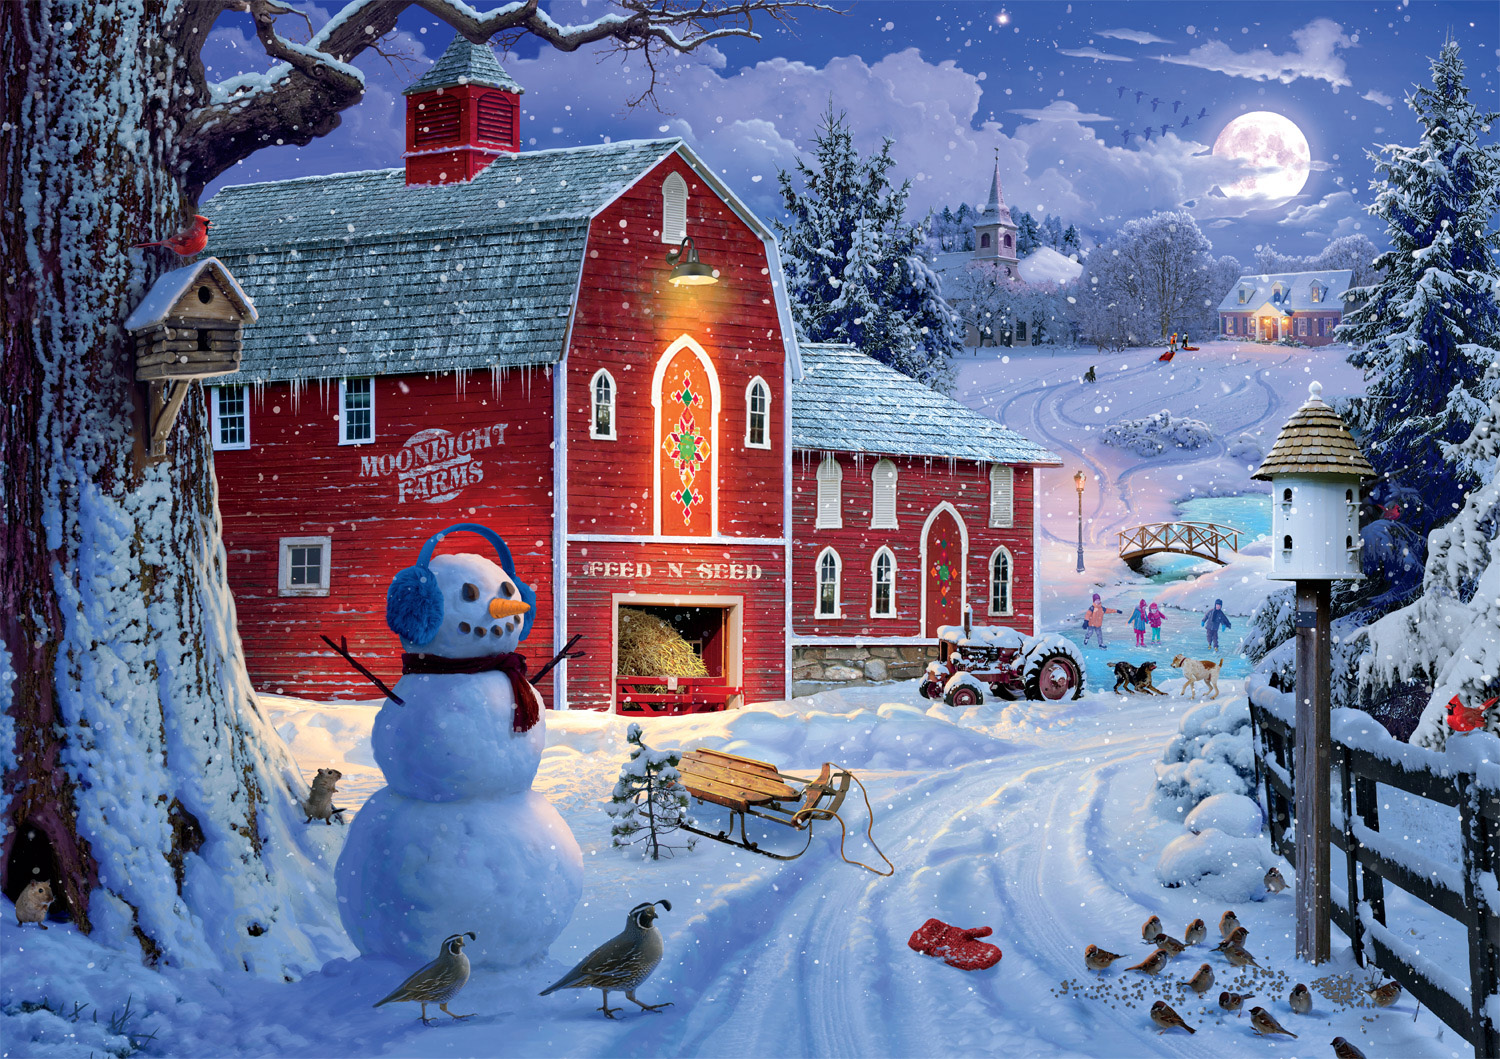 Winter Frolic Countryside Jigsaw Puzzle